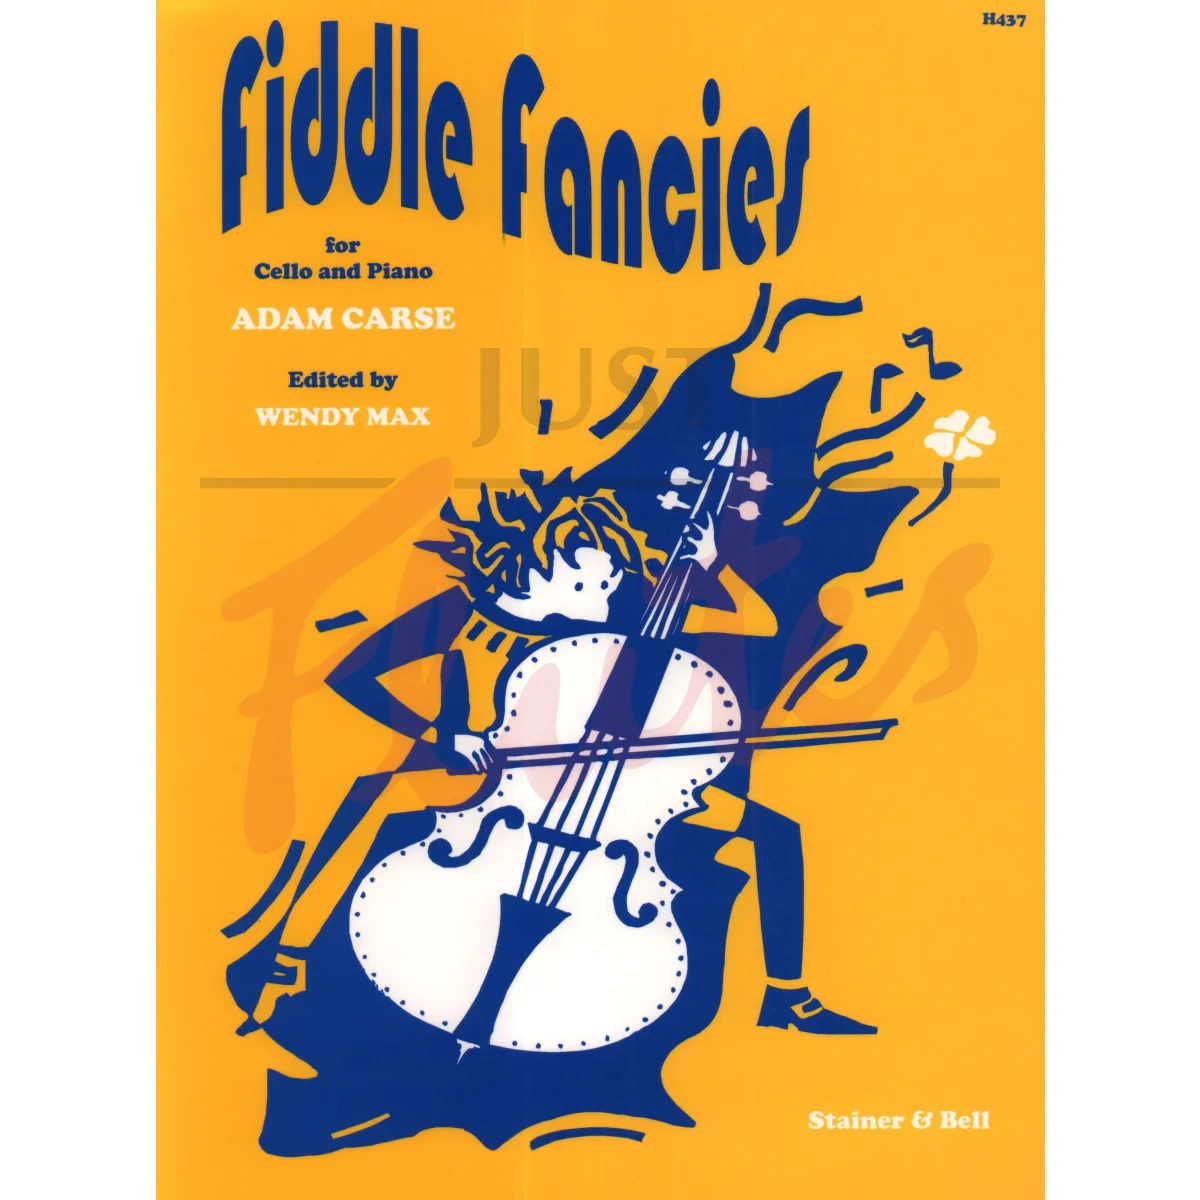 Fiddle Fancies for Cello and Piano